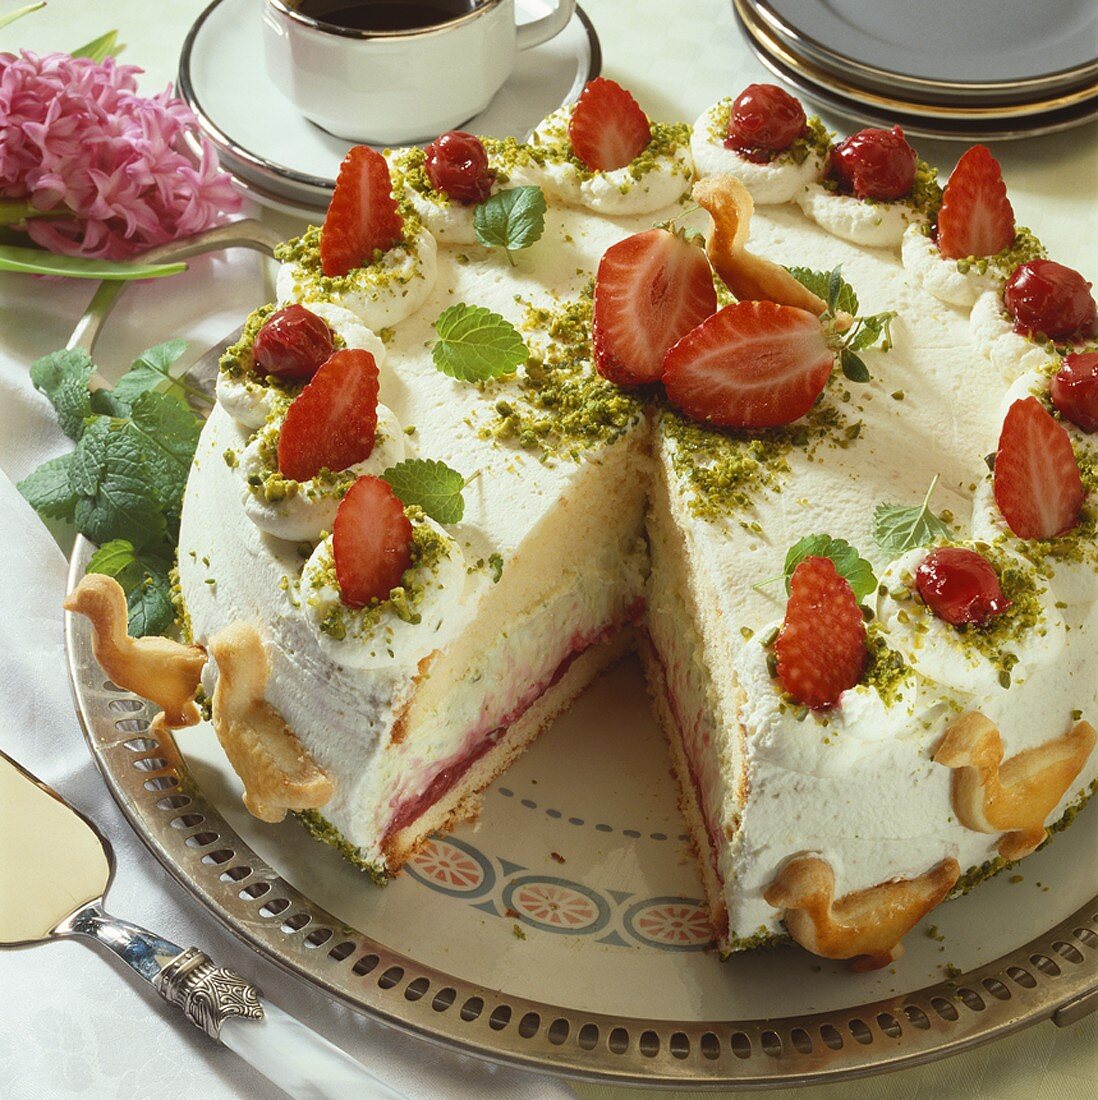 Strawberry cream cake, decorated with pastry geese